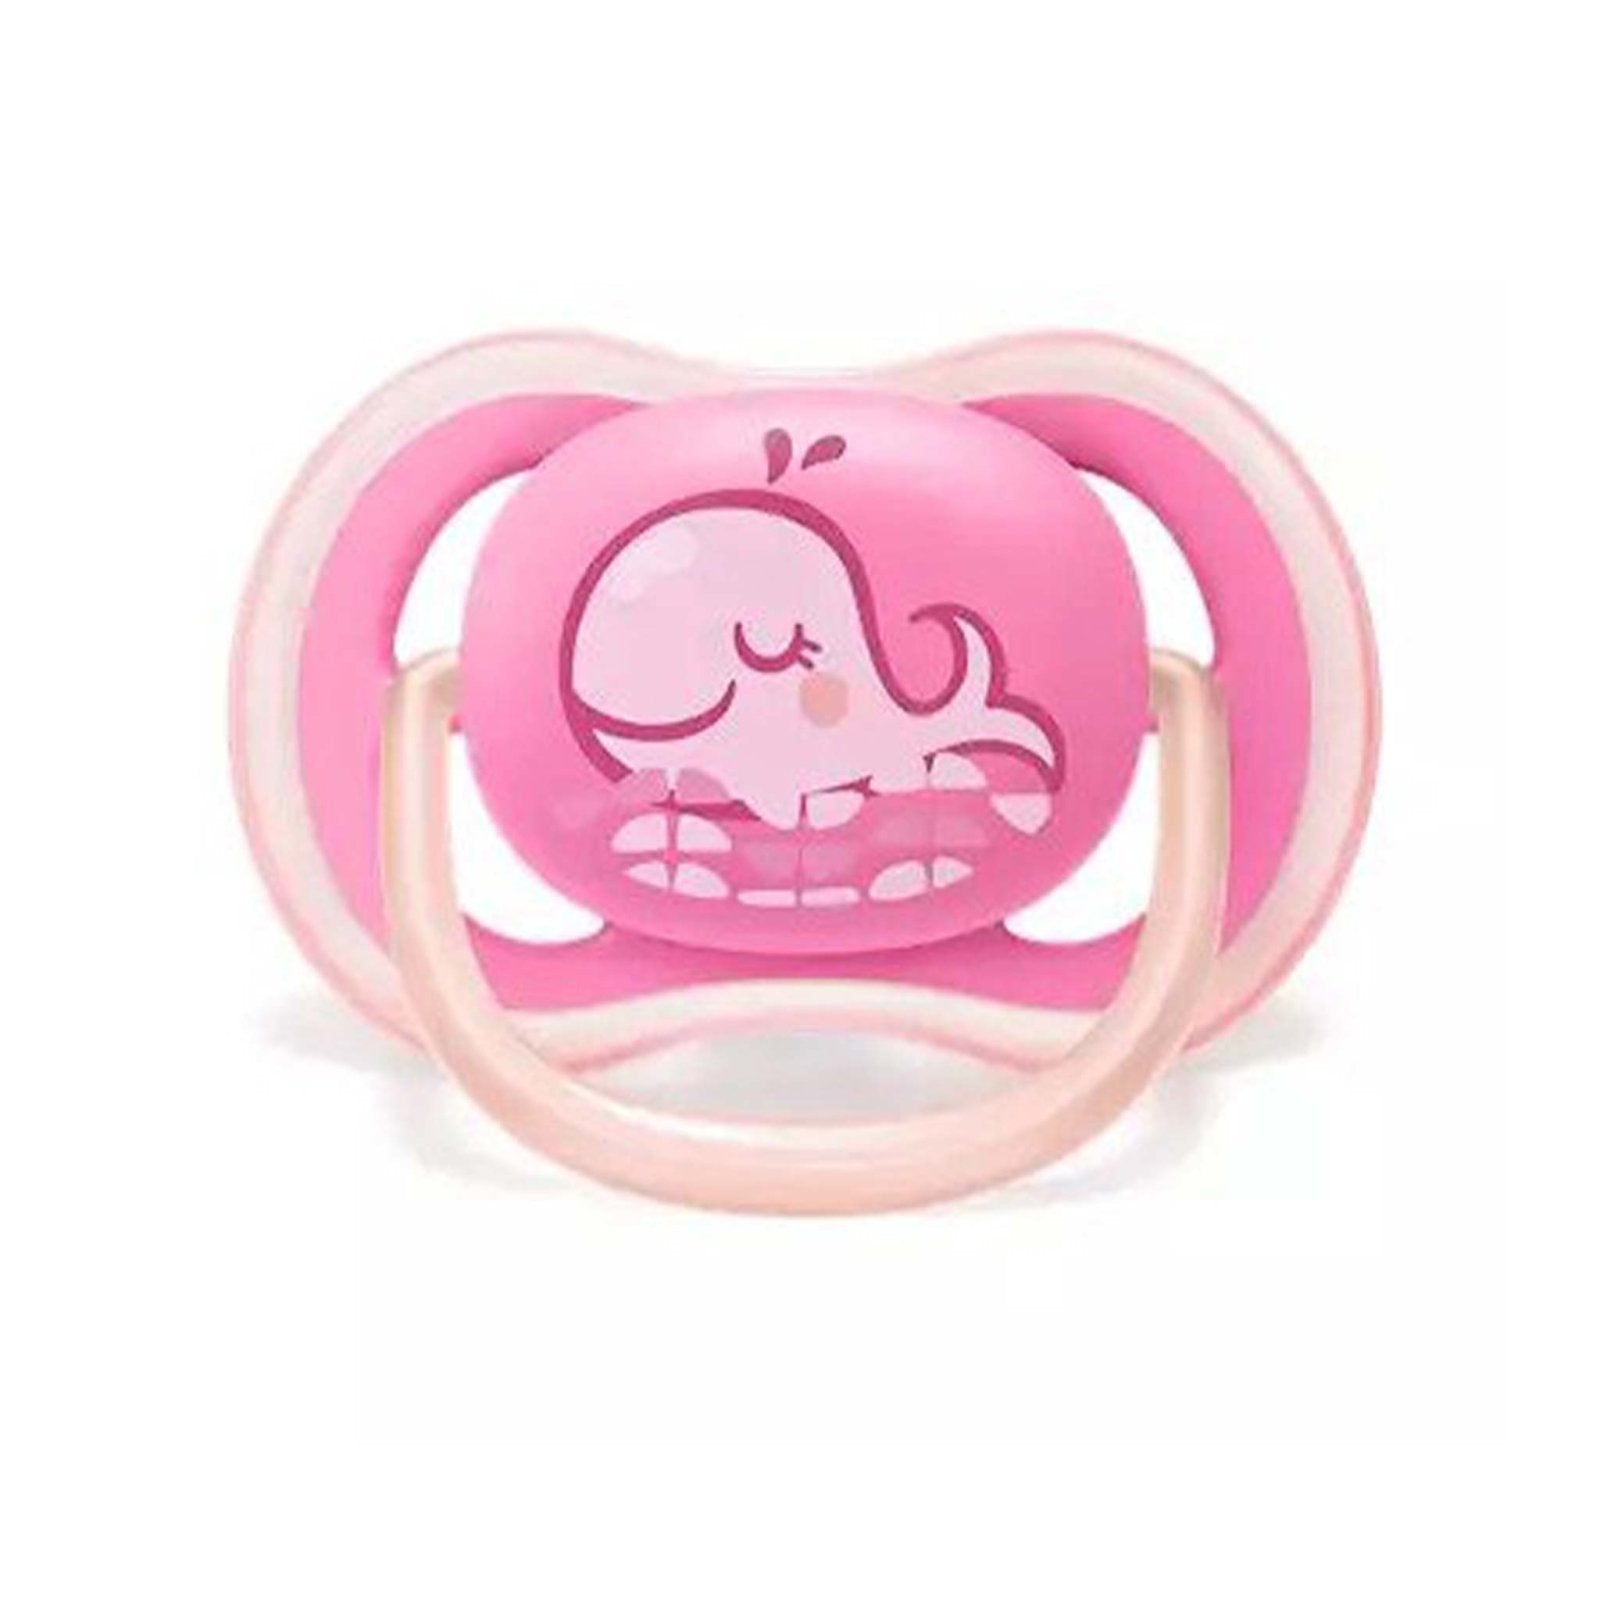 Ultra Air pacifier Star Print by Avent